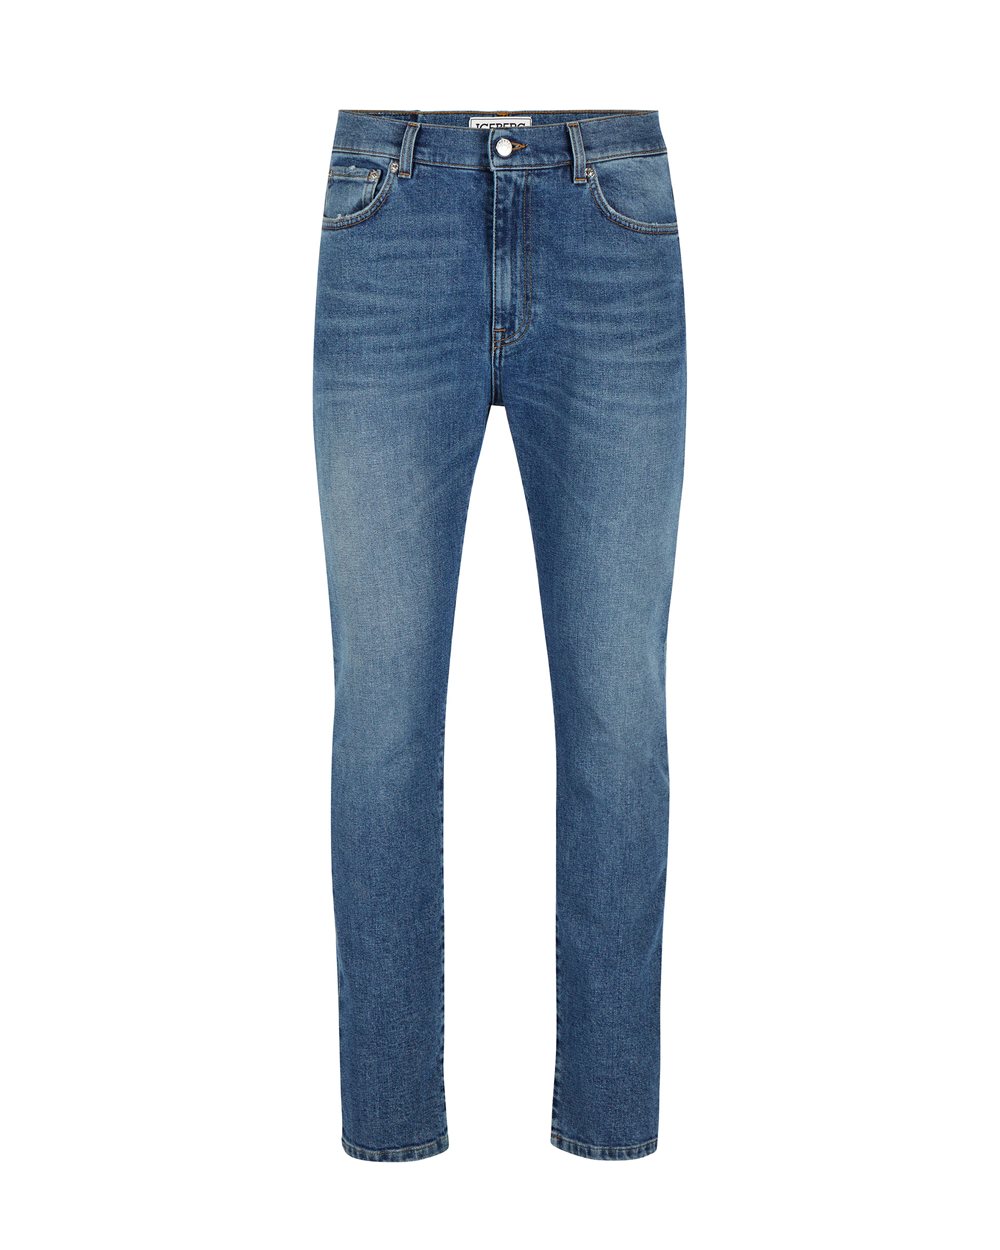 Faded 5-pocket blue jeans - Trousers | Iceberg - Official Website